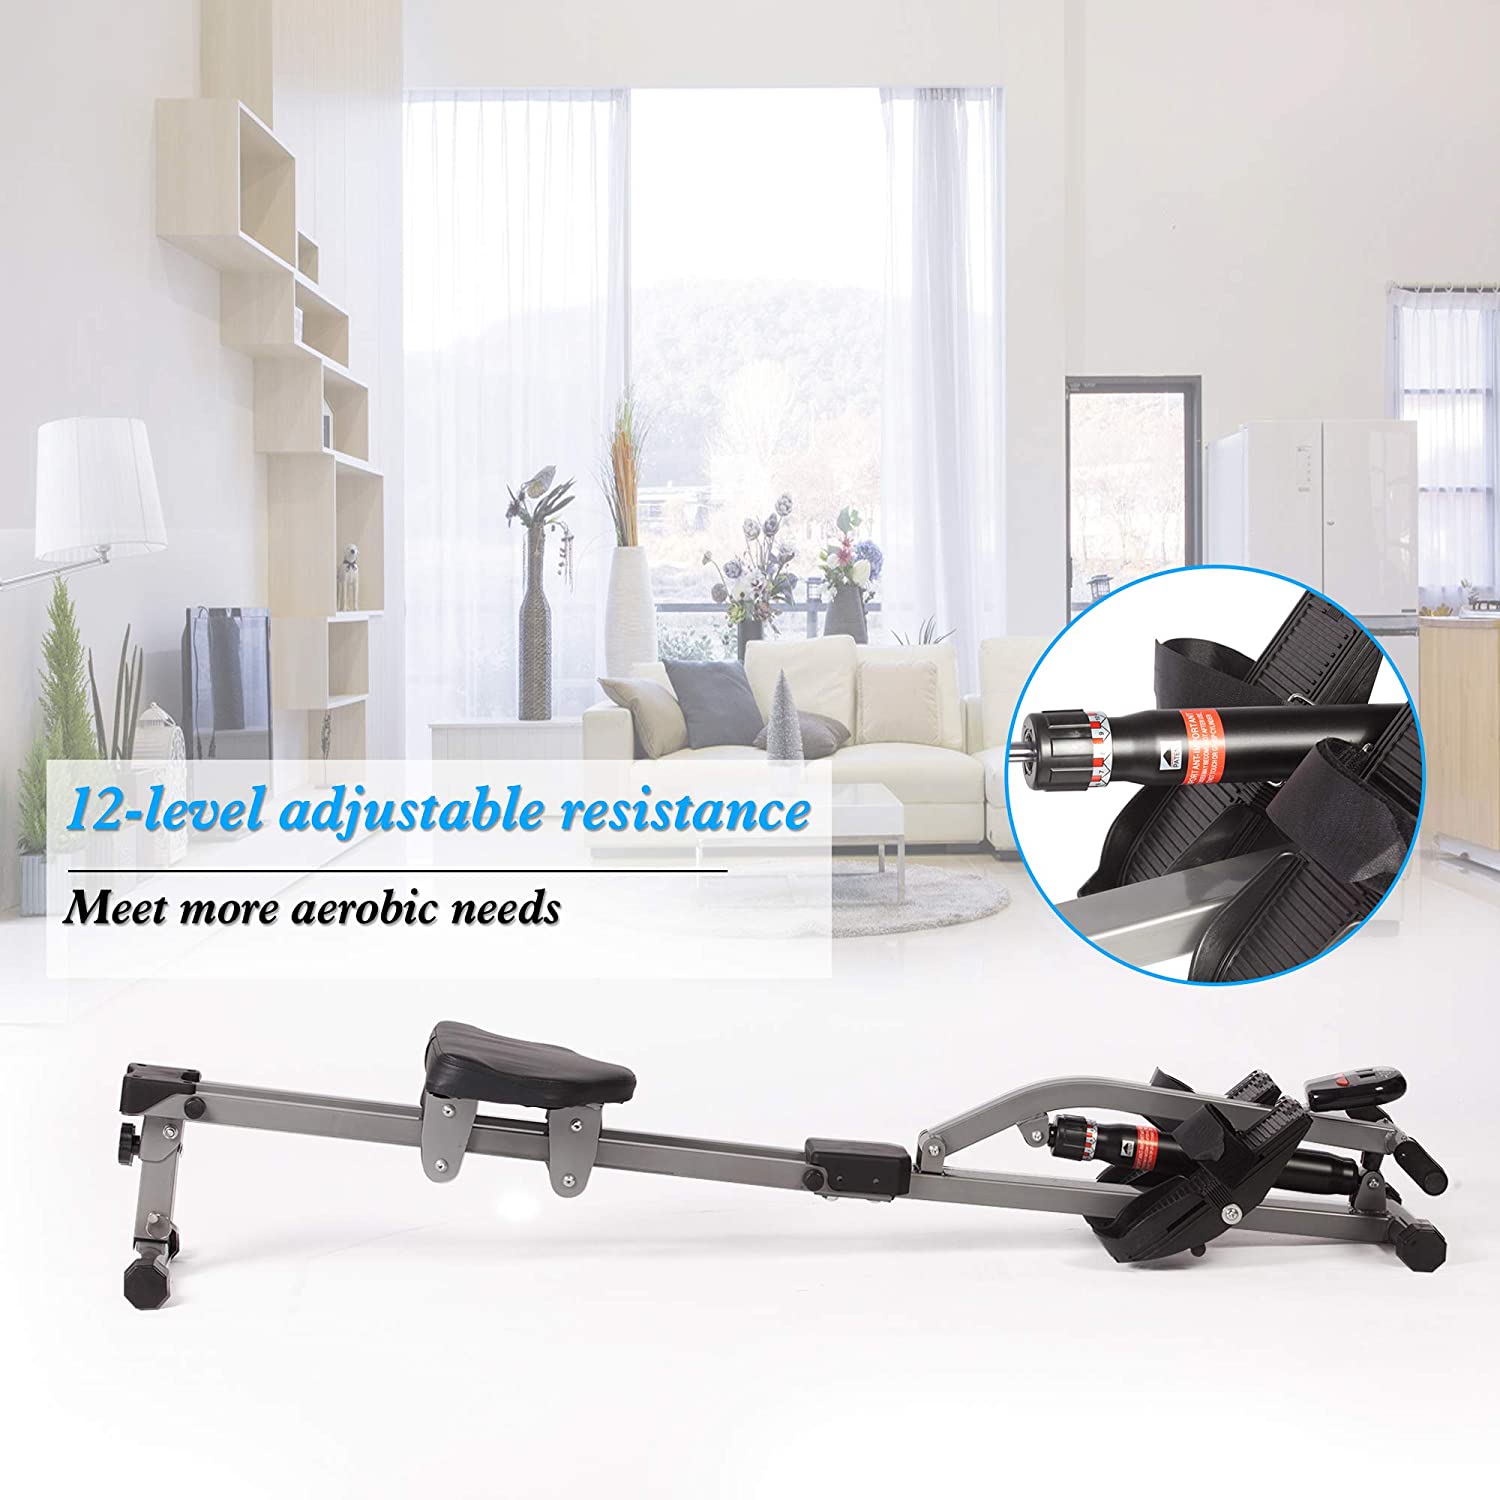 Hydraulic Rowing Machine Full Body Stamina Exercise Power with 12 Levels Adjustable Resistance,Home Gyms Training Equipment Fitness Indoor